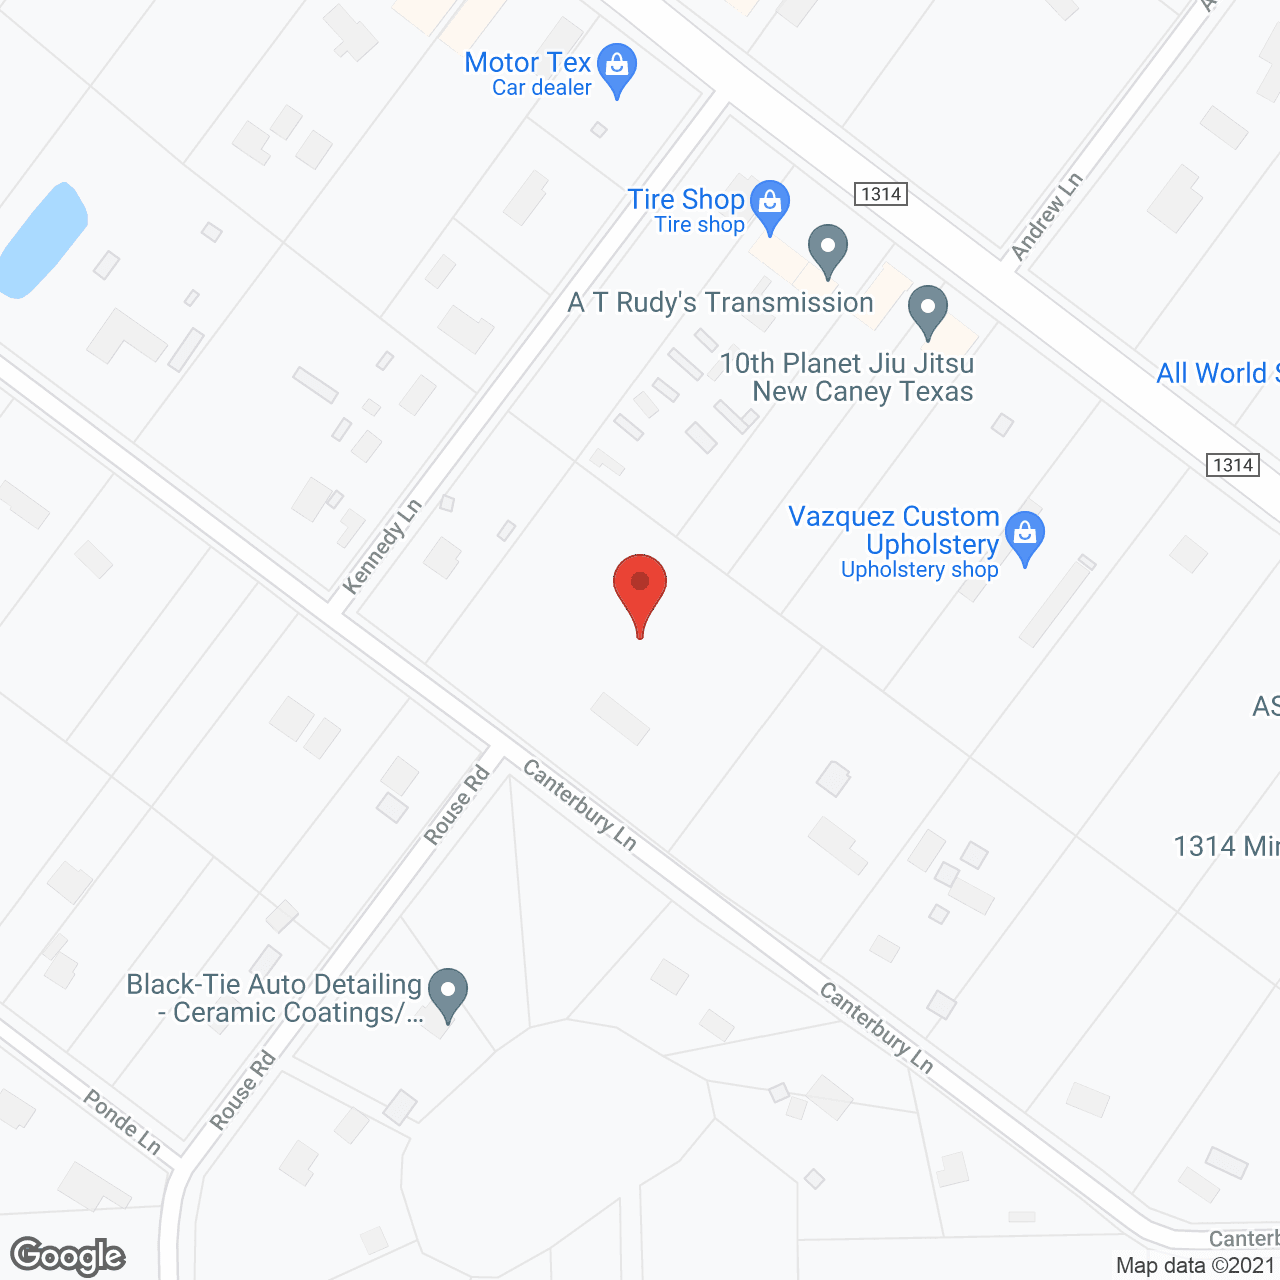 Plantation Assisted living B in google map